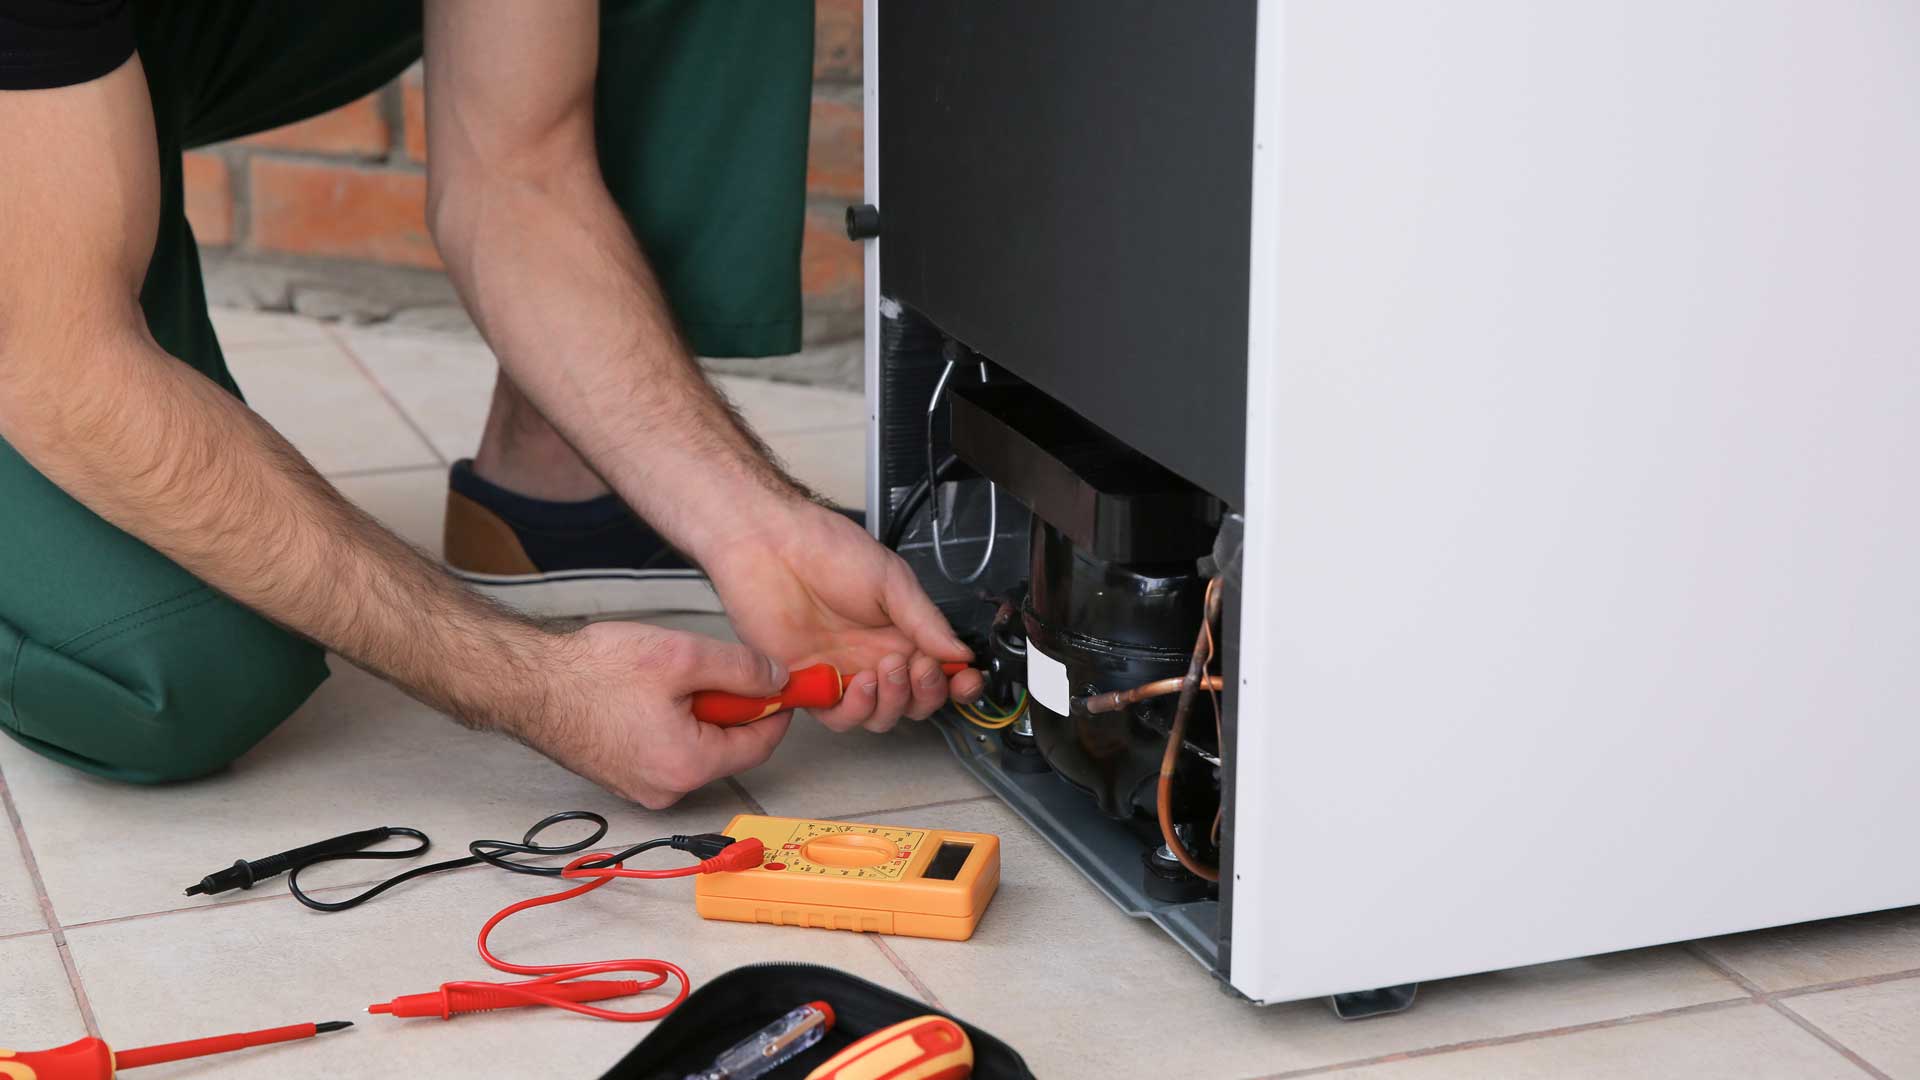 A man kneeling behind a refrigerator to tinker with the wiring behind it